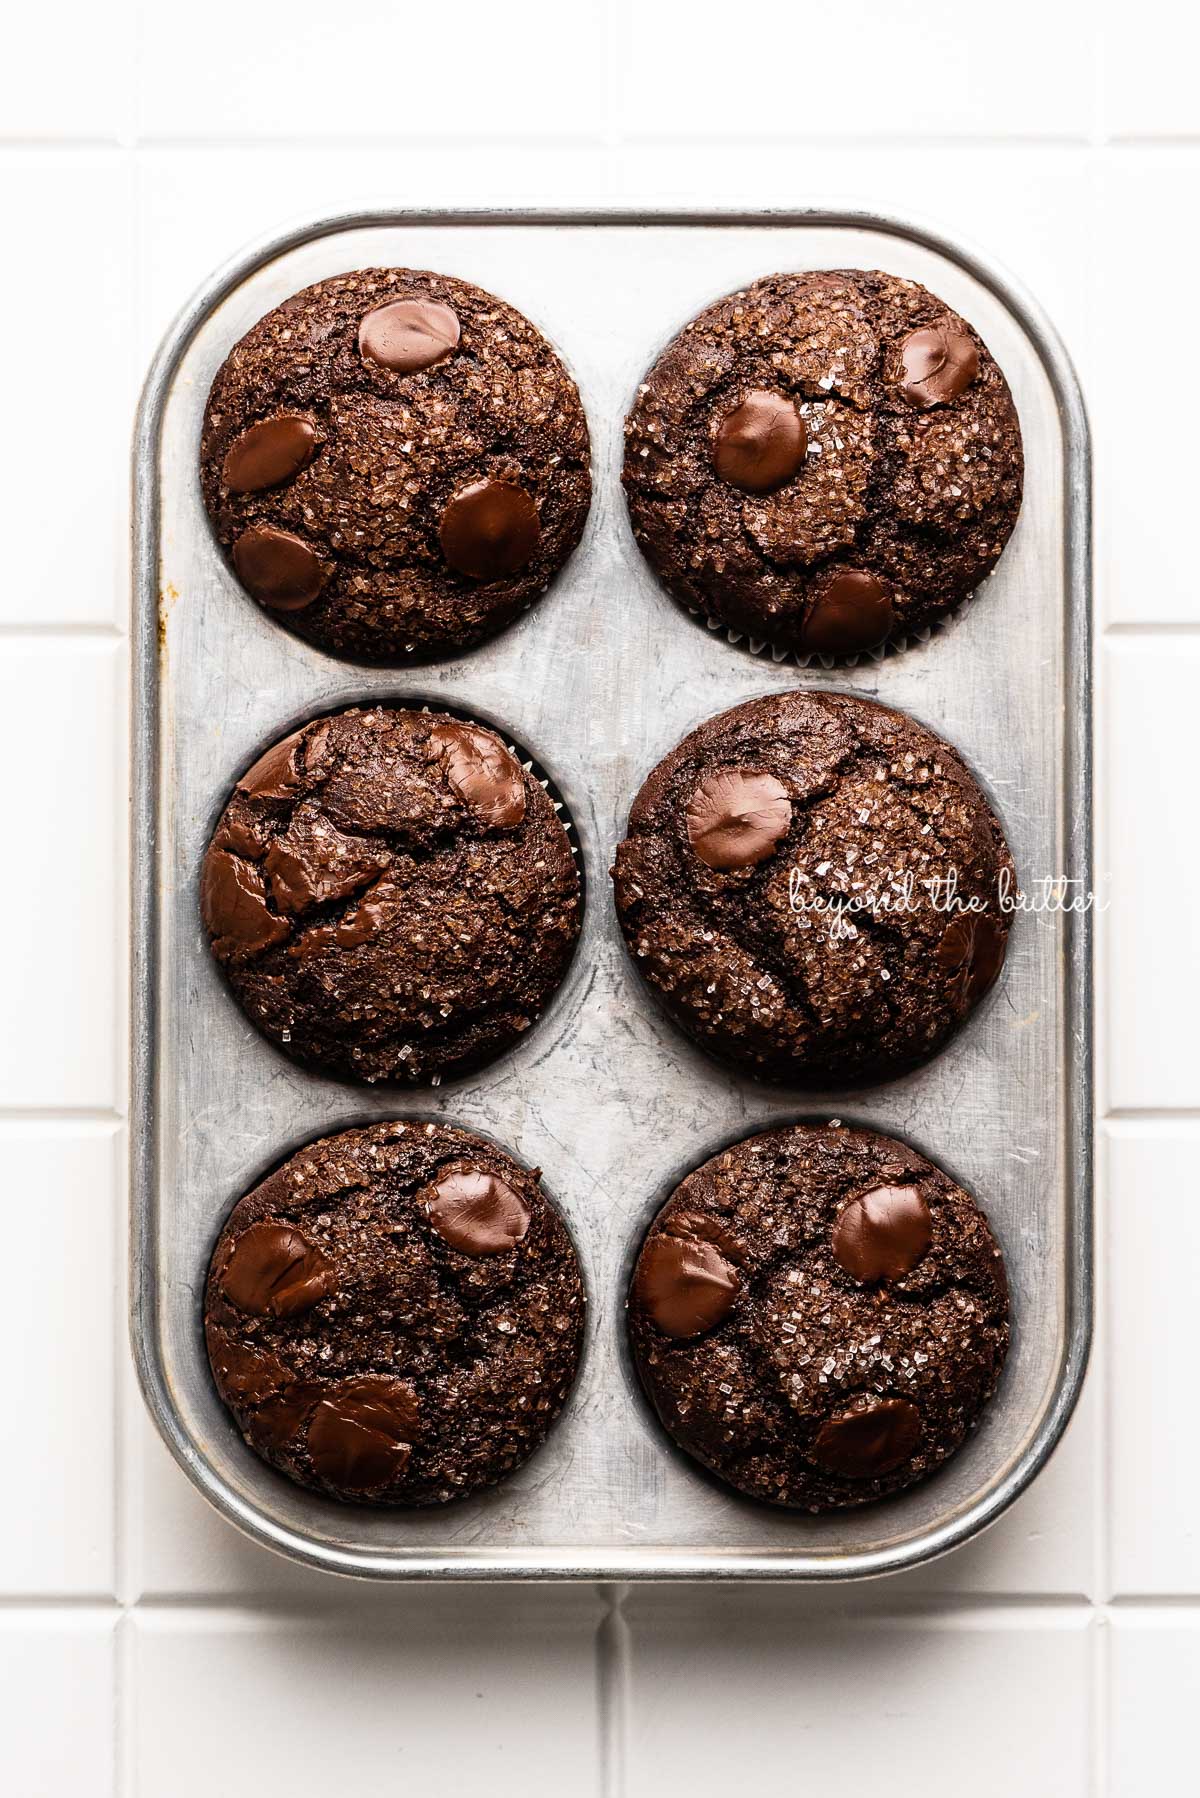 Double chocolate chip muffins in vintage muffin tin on white tiled background | © Beyond the Butter®